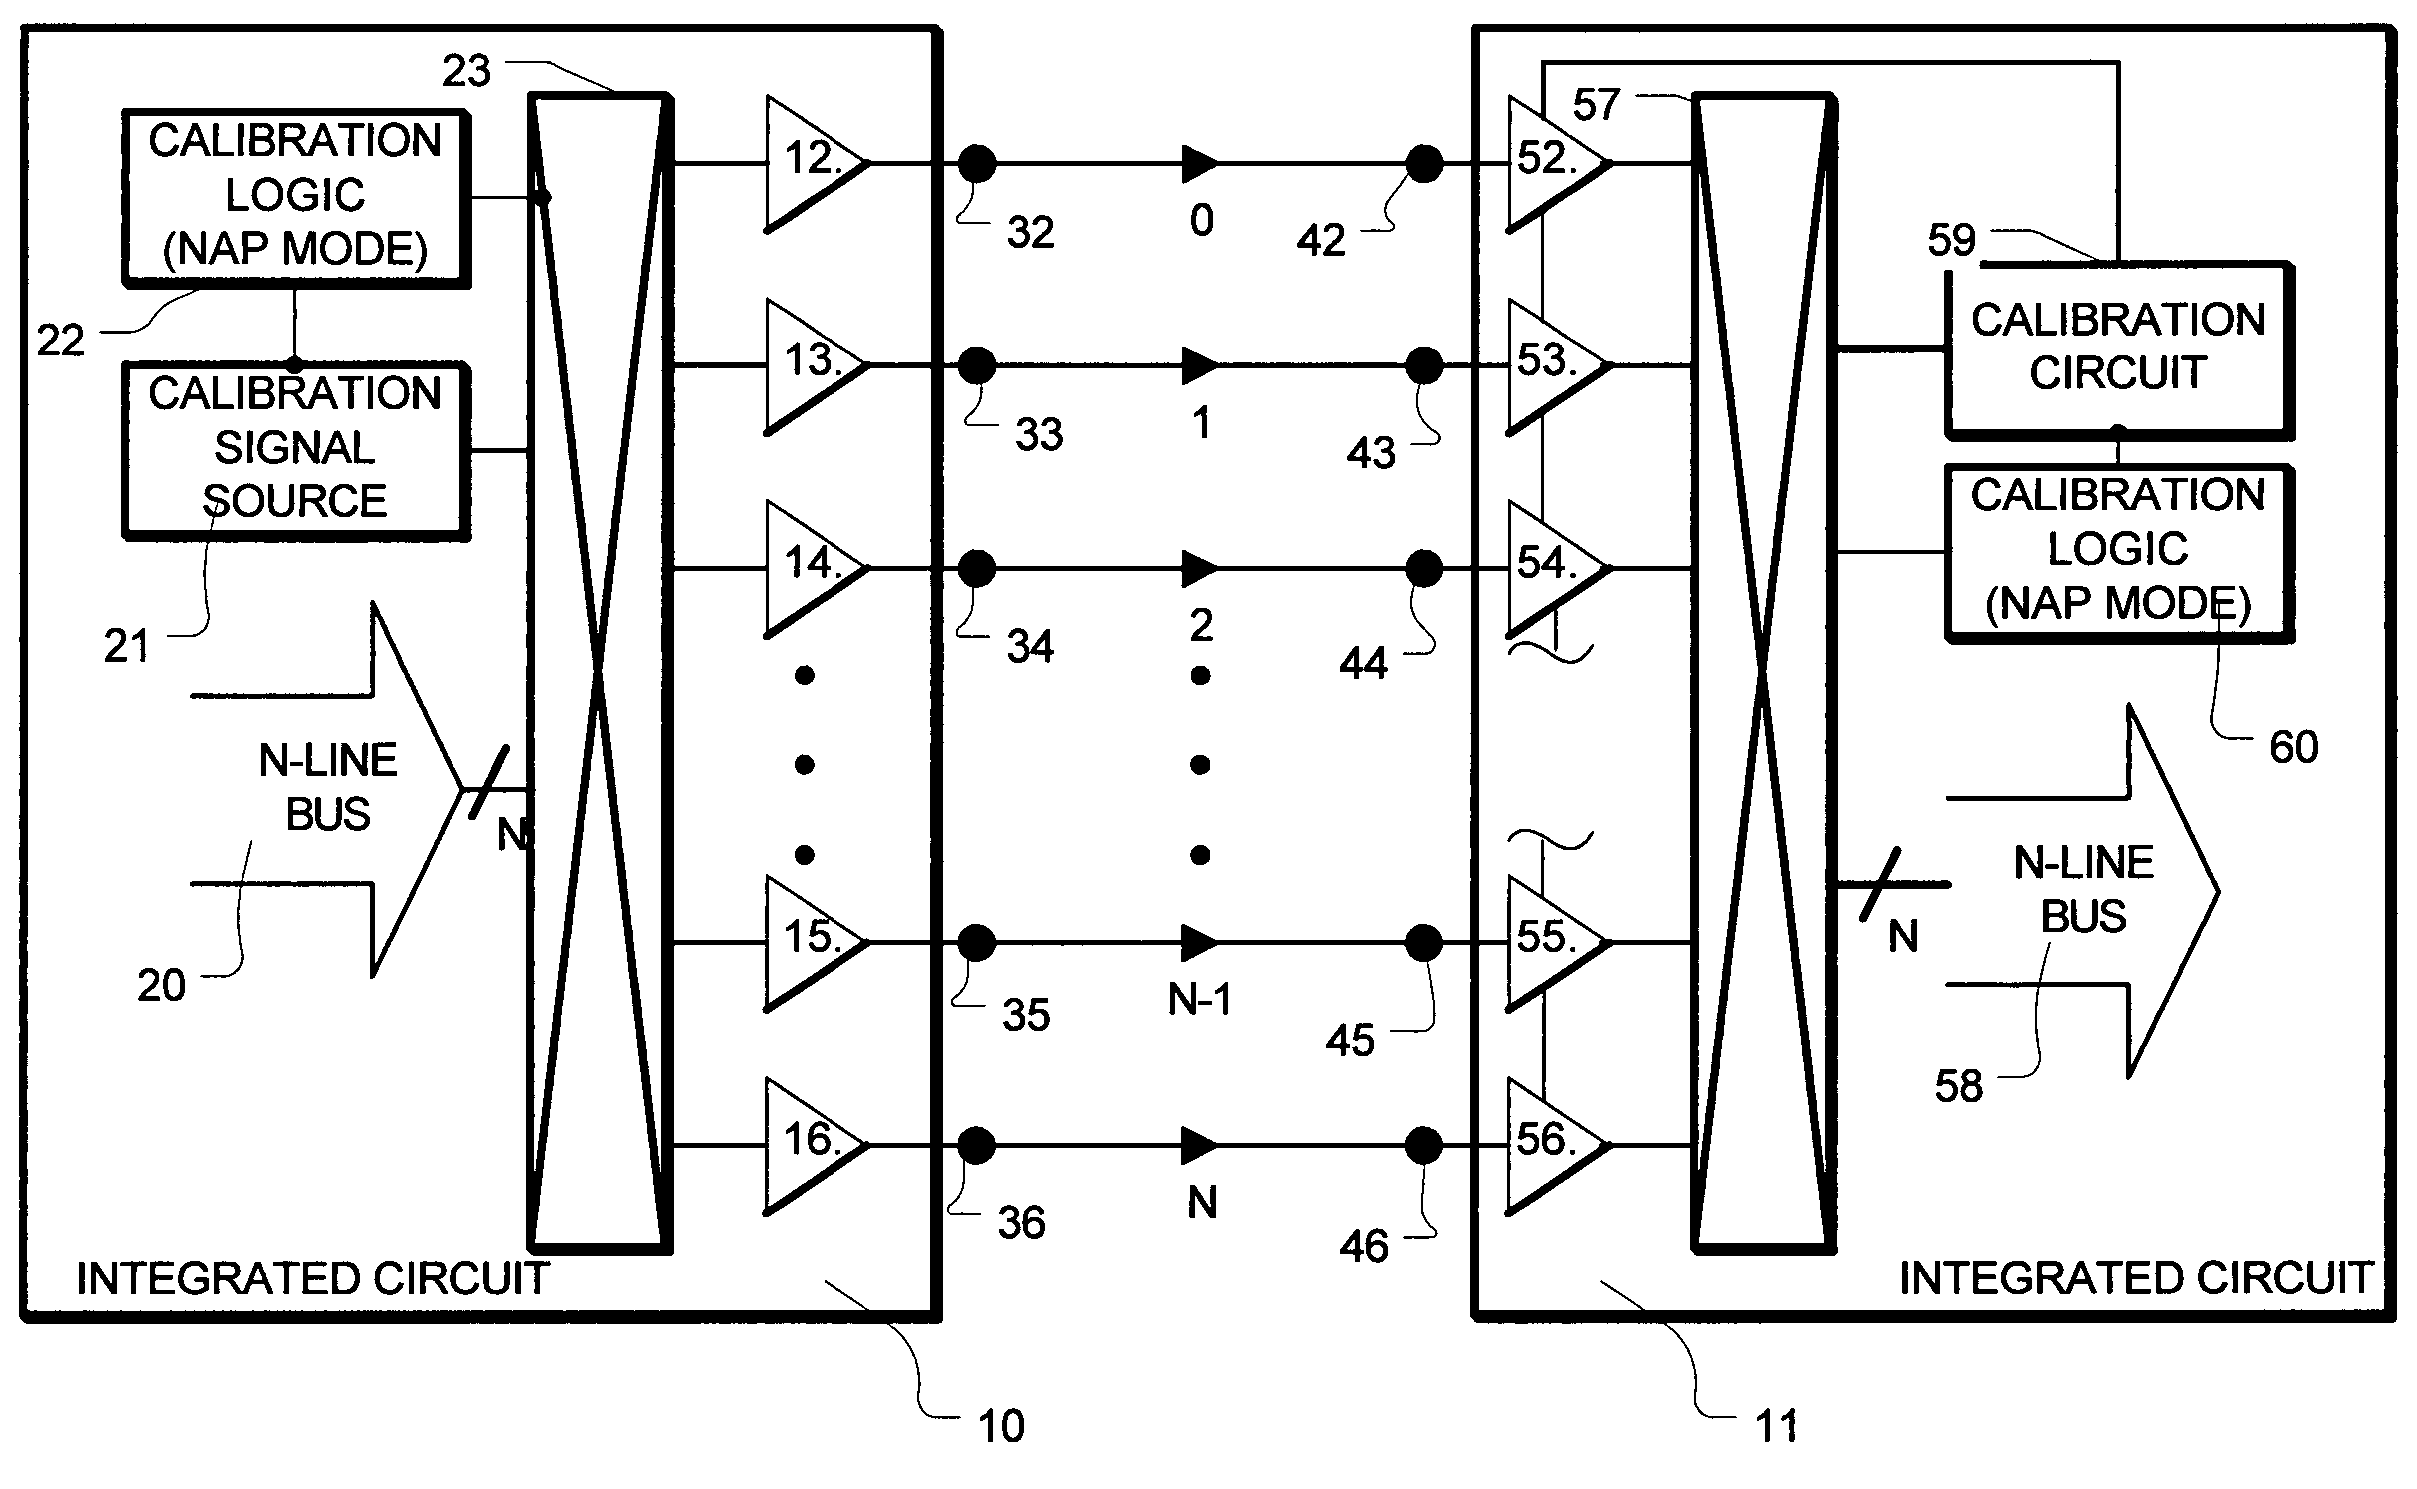 Periodic interface calibration for high speed communication